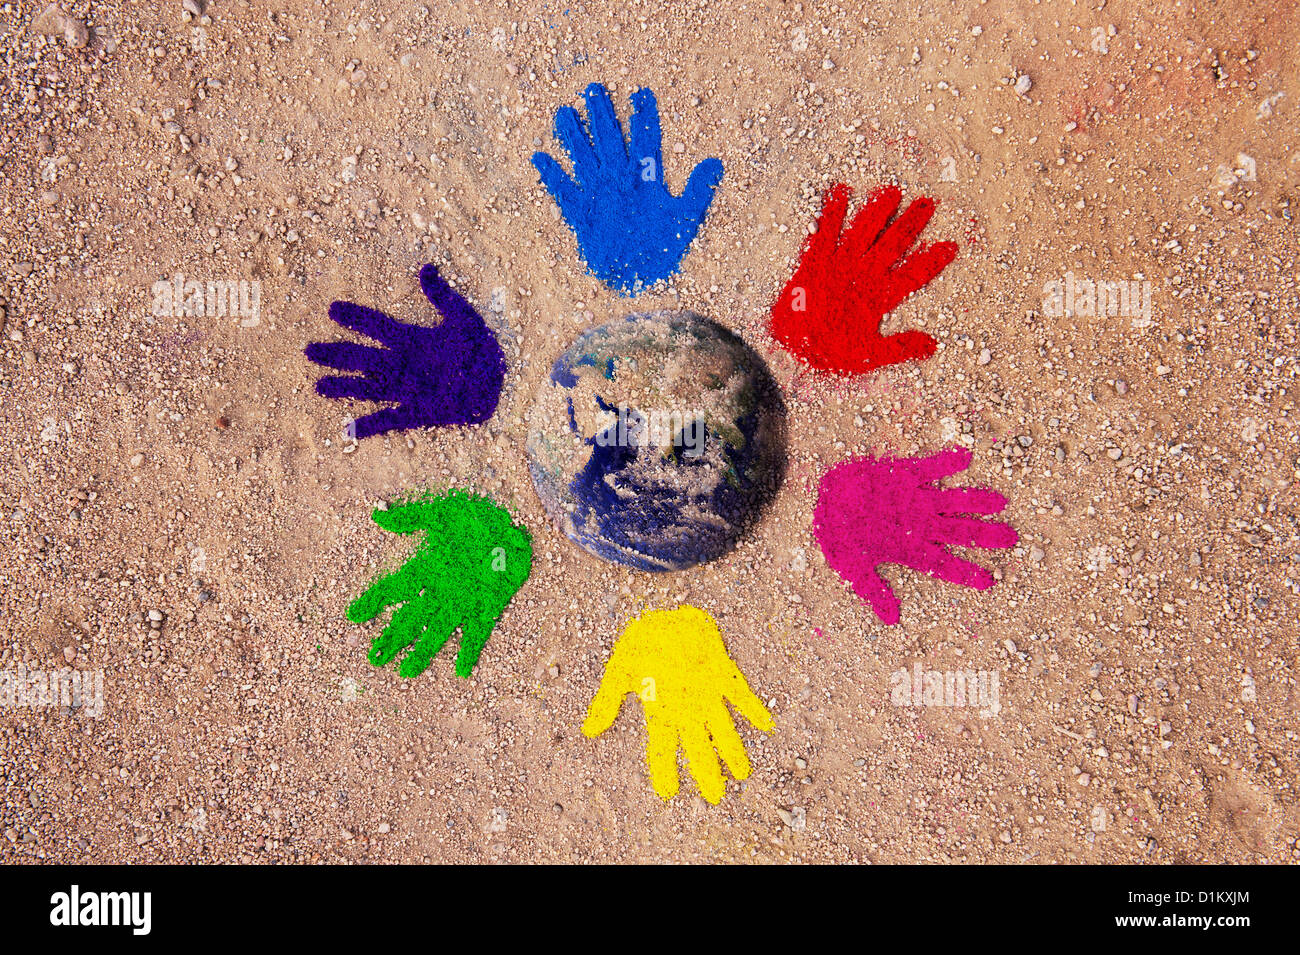 Coloured powder hand prints in a circular pattern on a dirt track with the earth composited in the middle Stock Photo